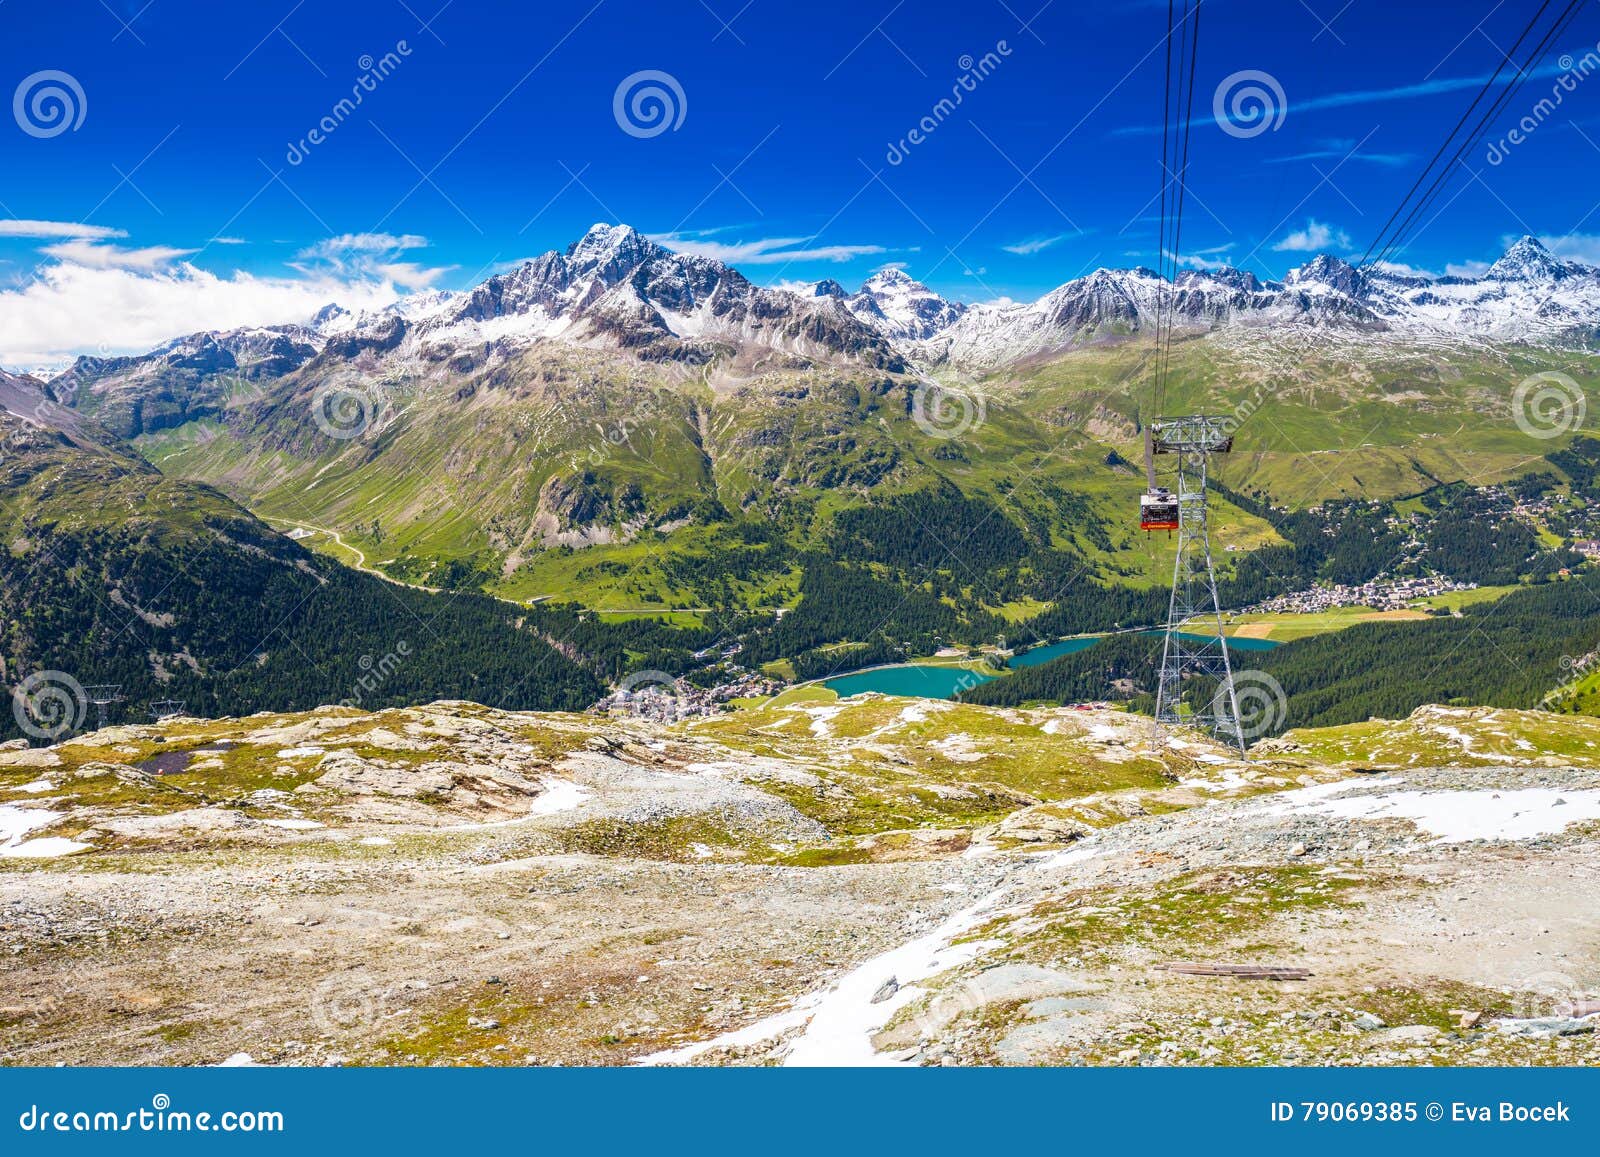 corvatsch cable car with upper engadin valley in swiss alps